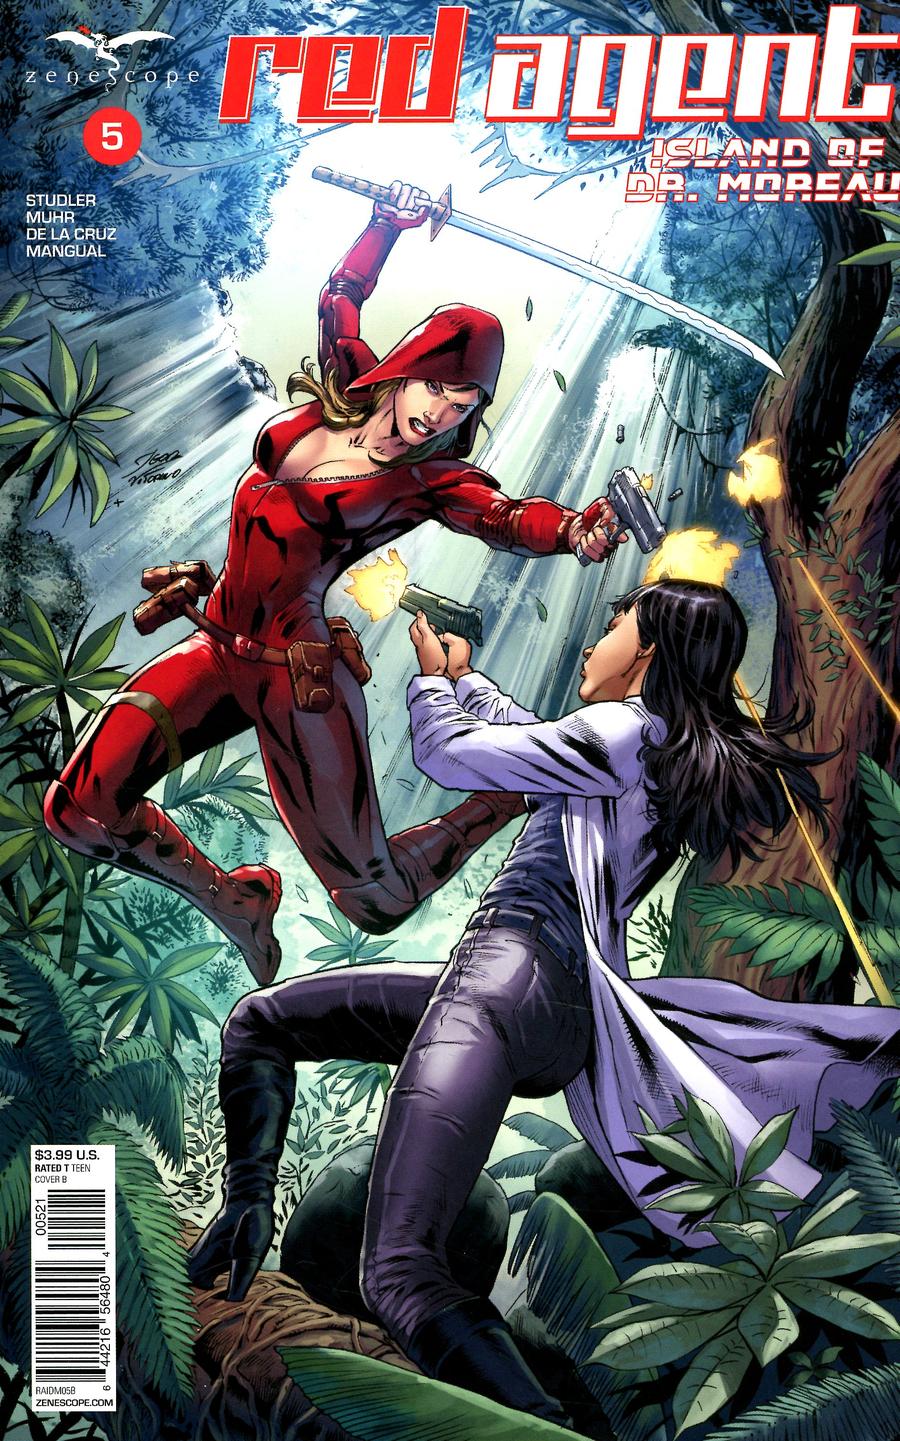 Grimm Fairy Tales Presents Red Agent Island Of Dr Moreau #5 Cover B Igor Vitorino